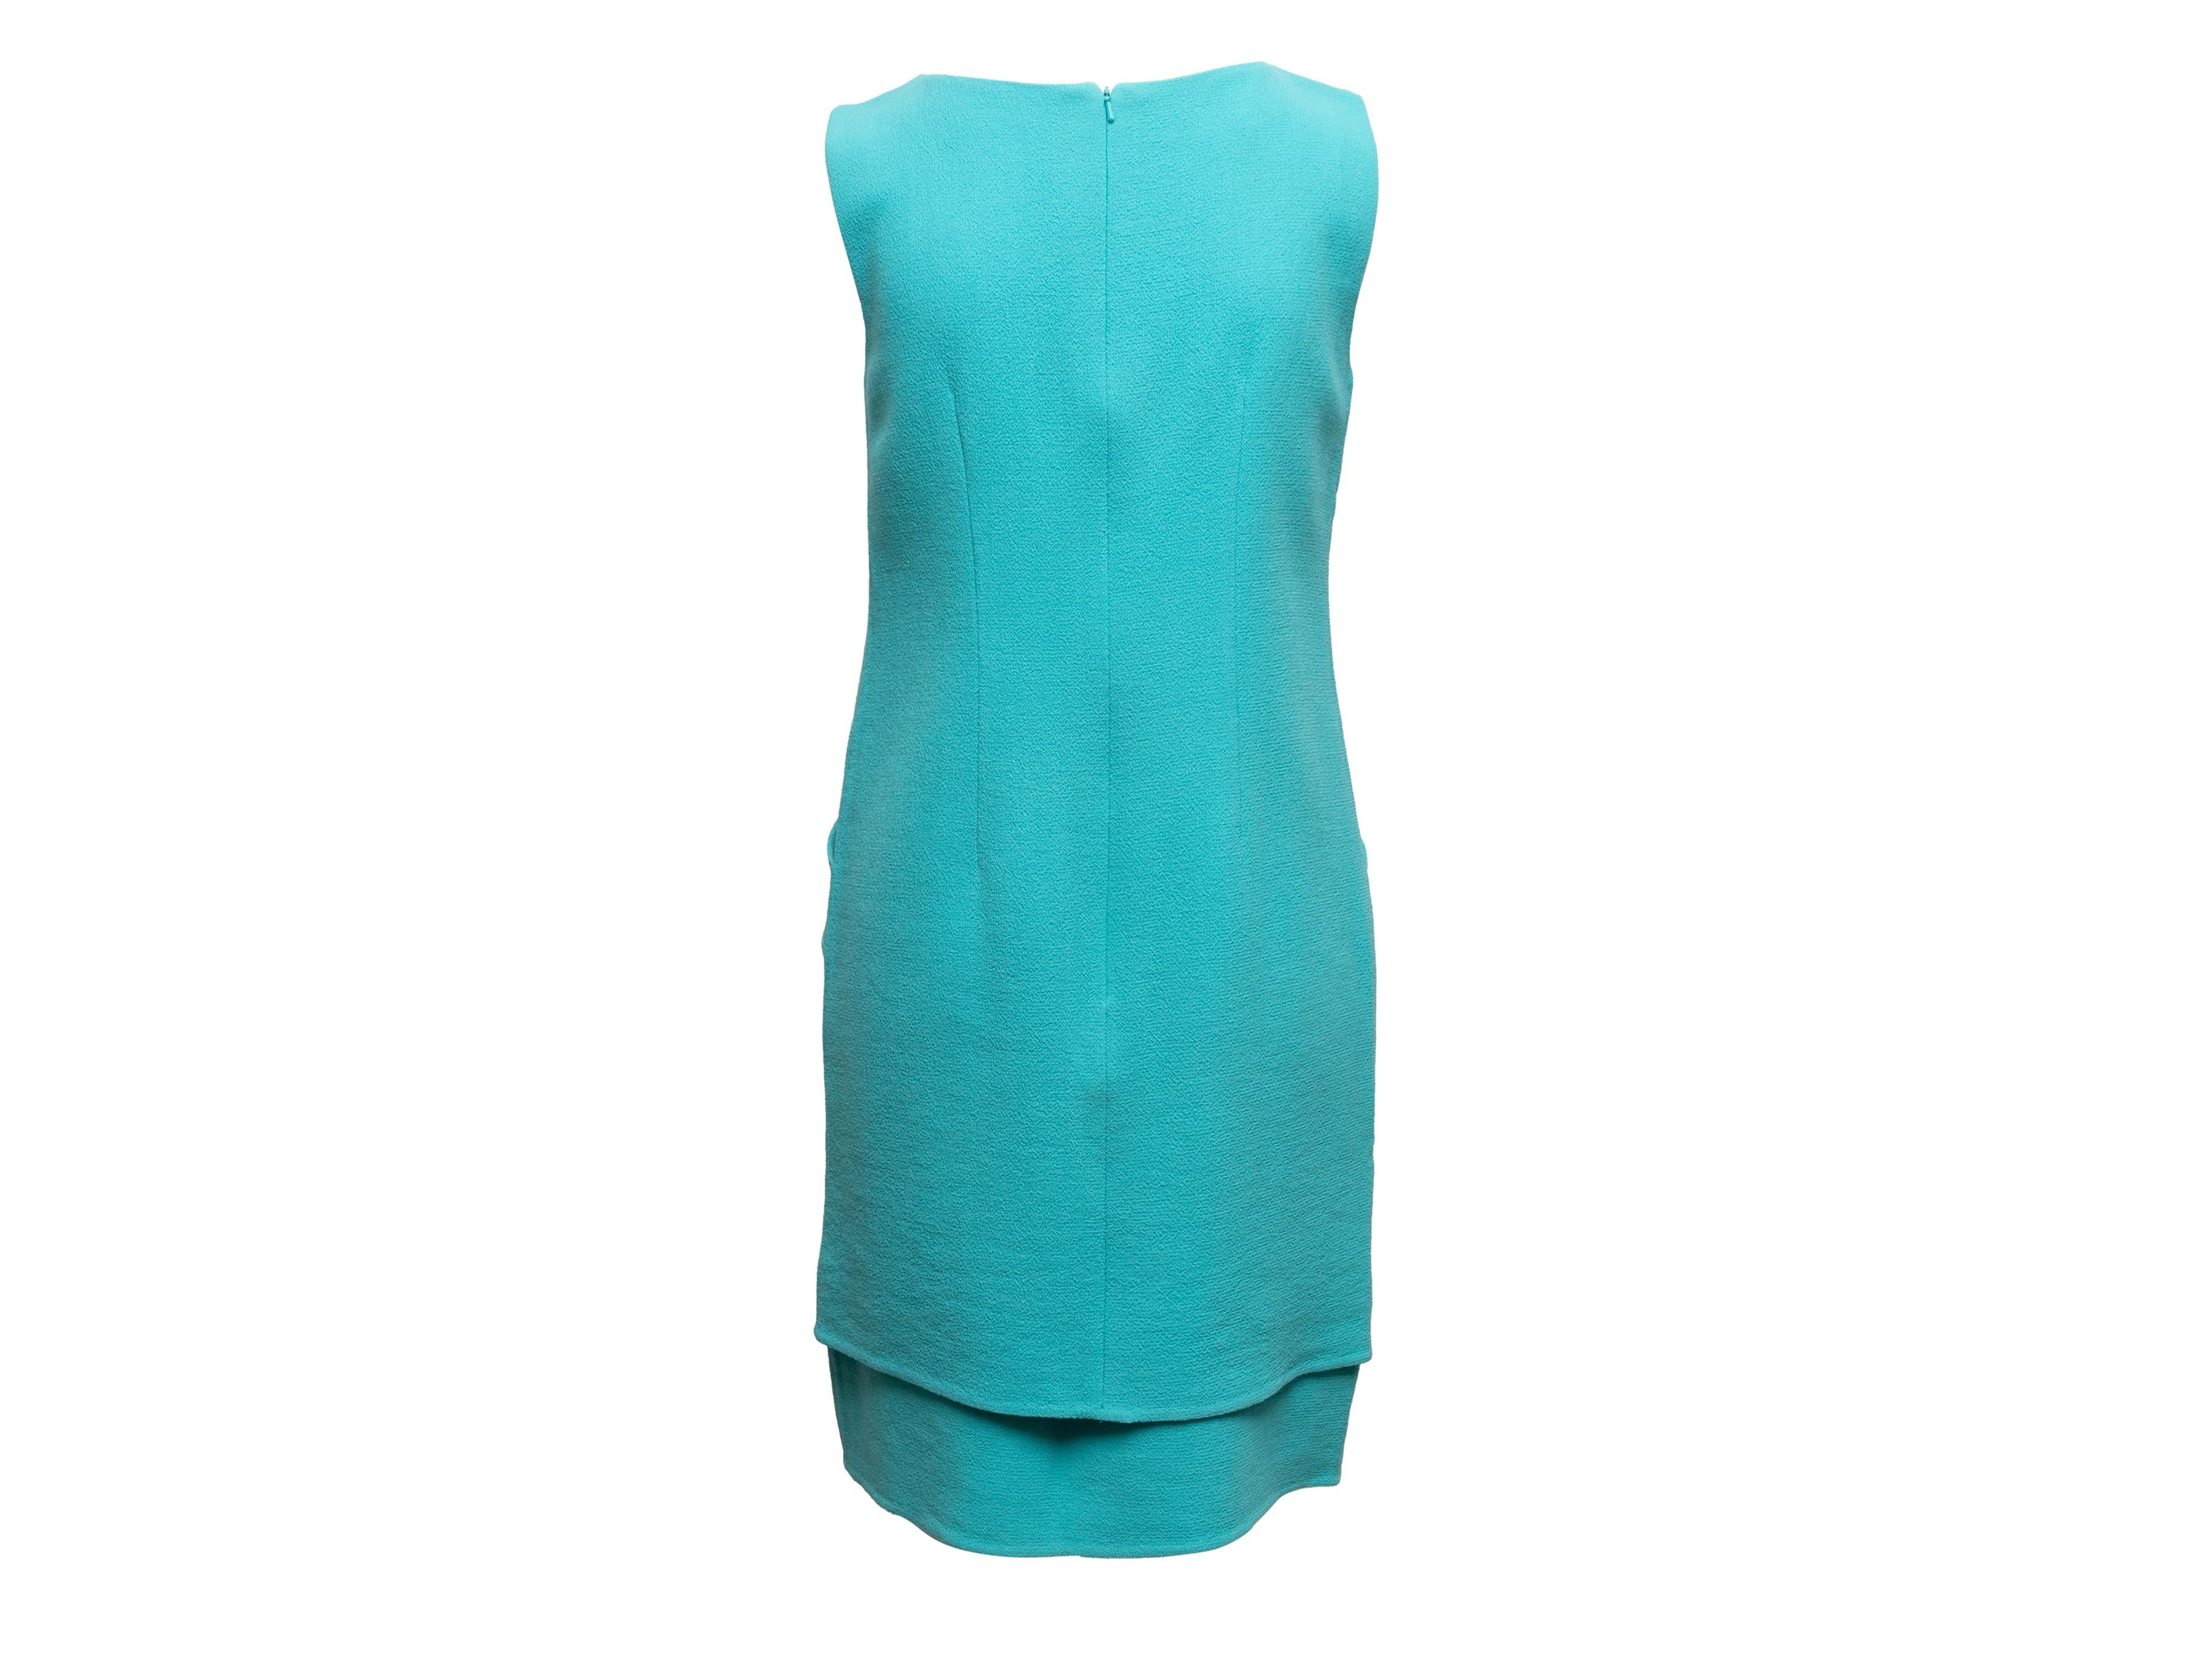 Turquoise Oscar de la Renta Resort 2015 Wool Dress Size US 4 In Good Condition For Sale In New York, NY